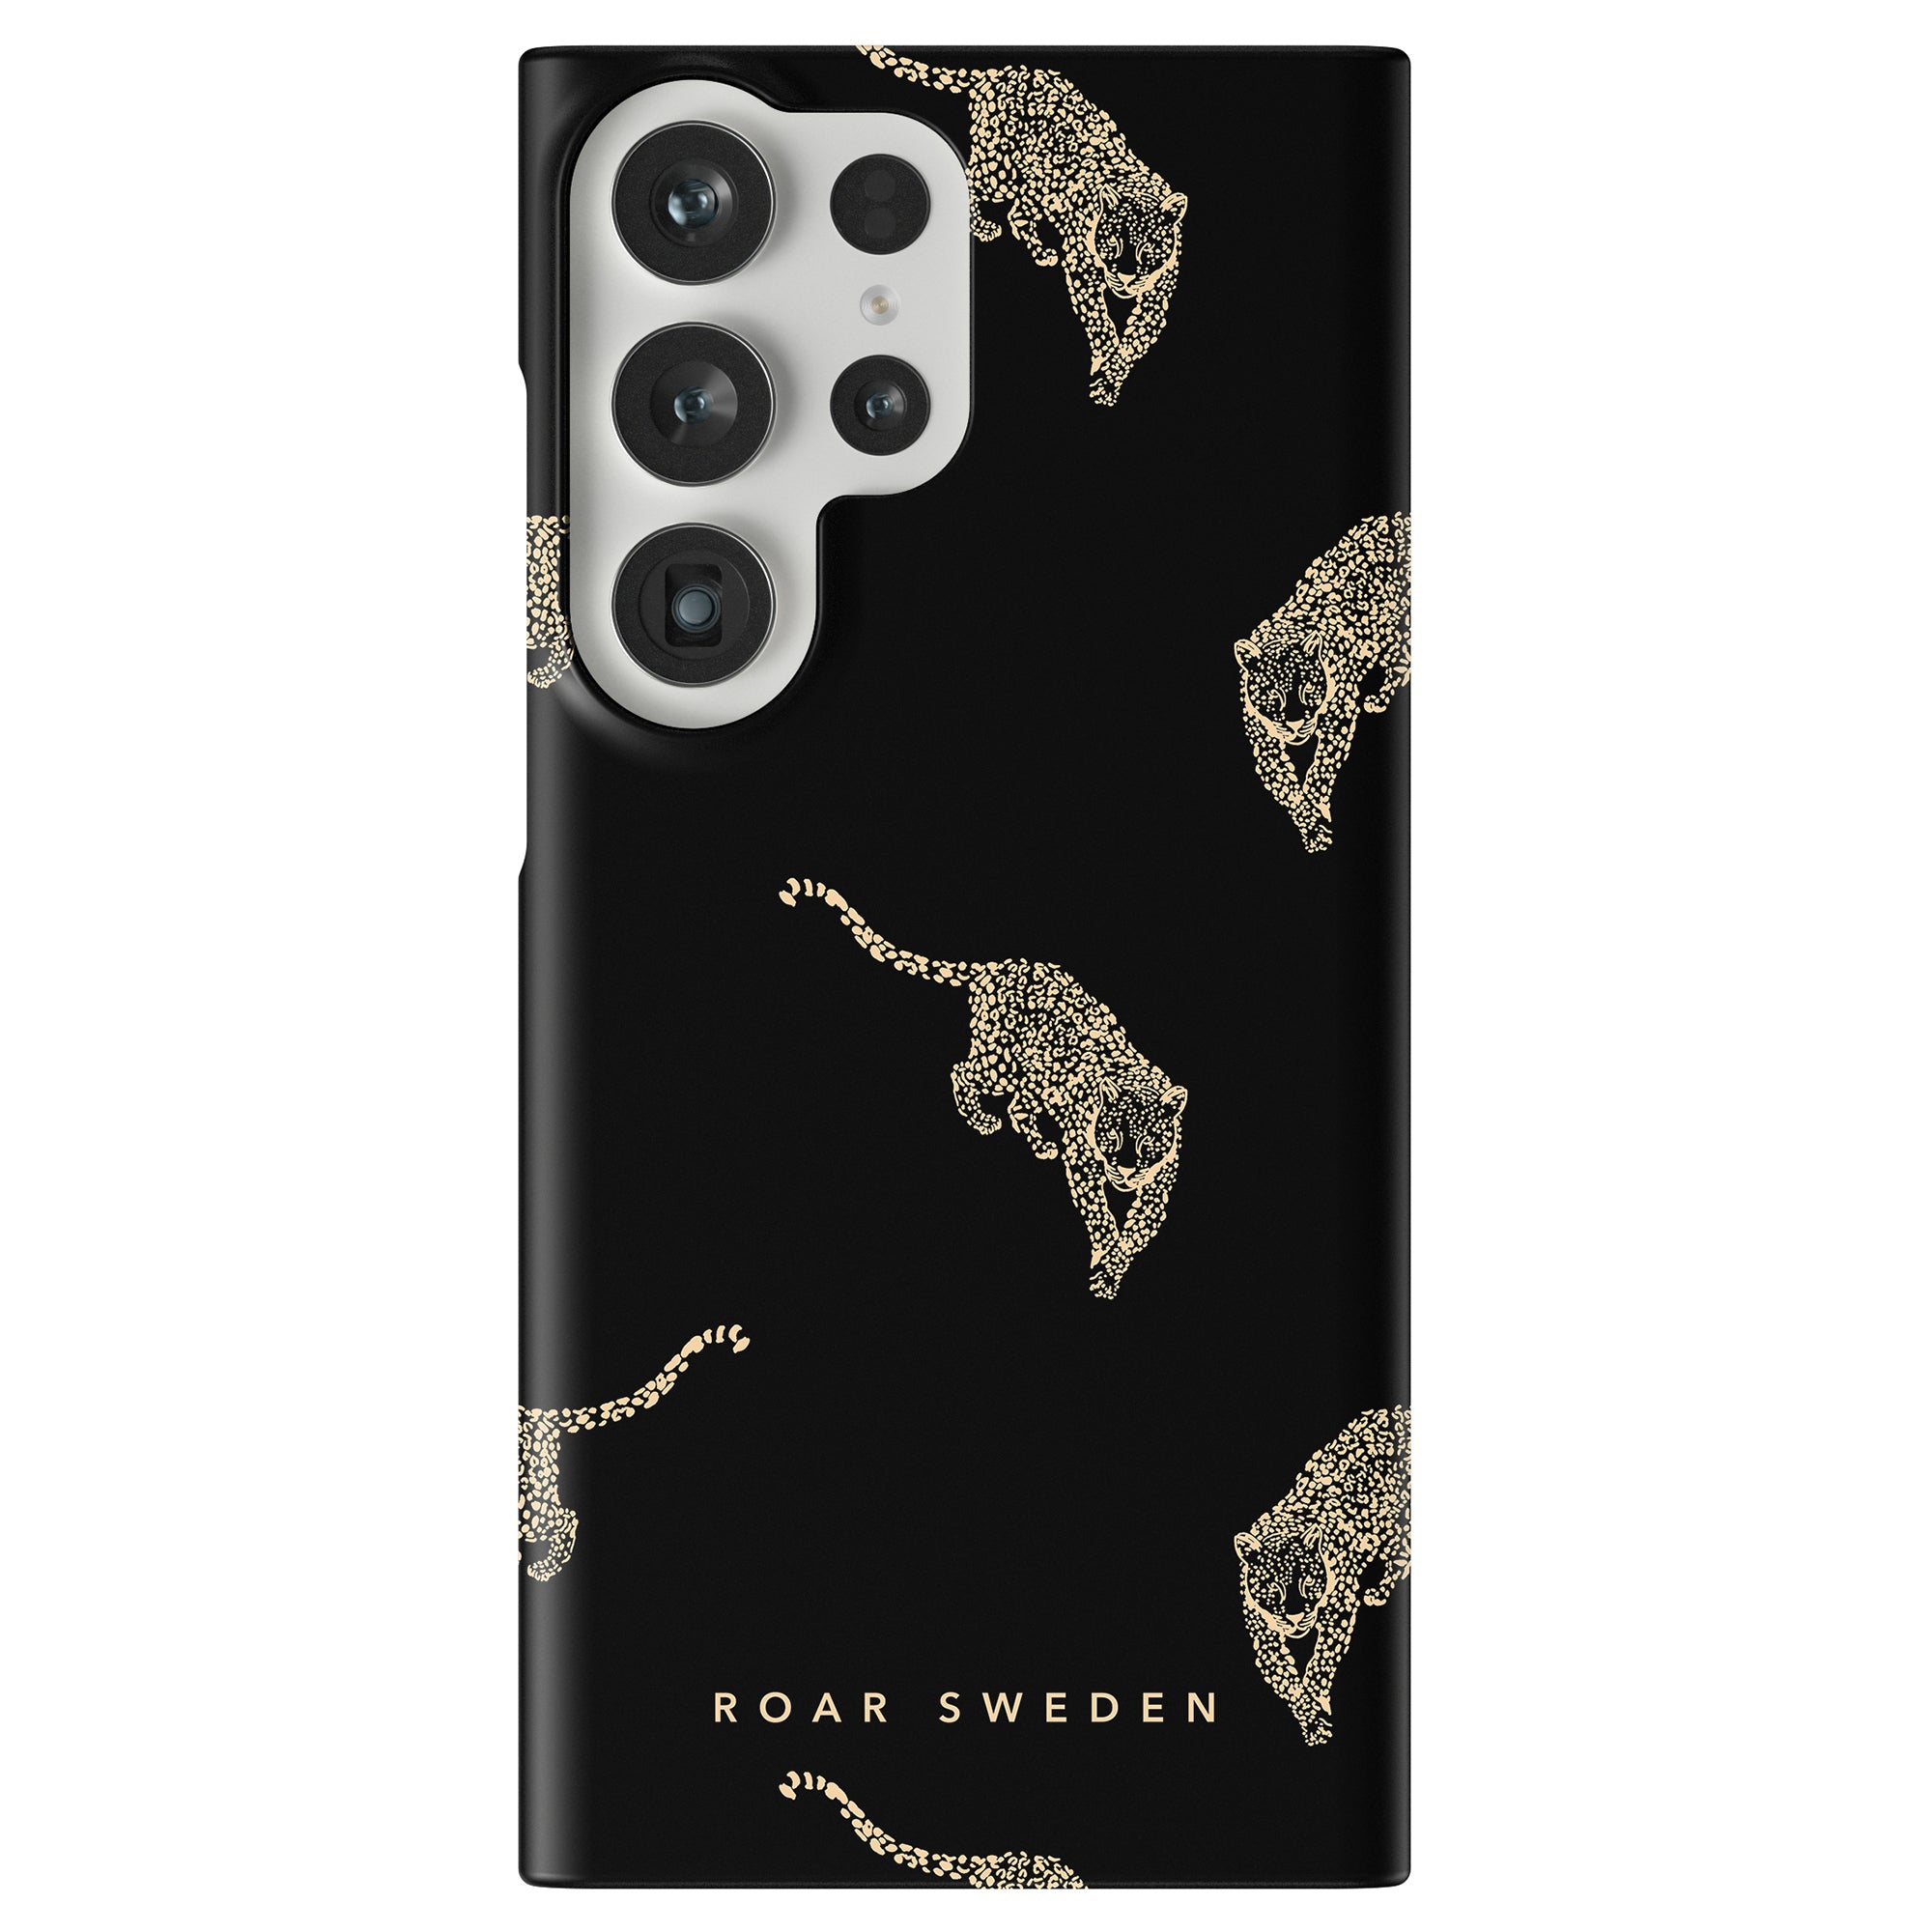 An elegant Kitty Black - Slim case with a hint of leopard print.